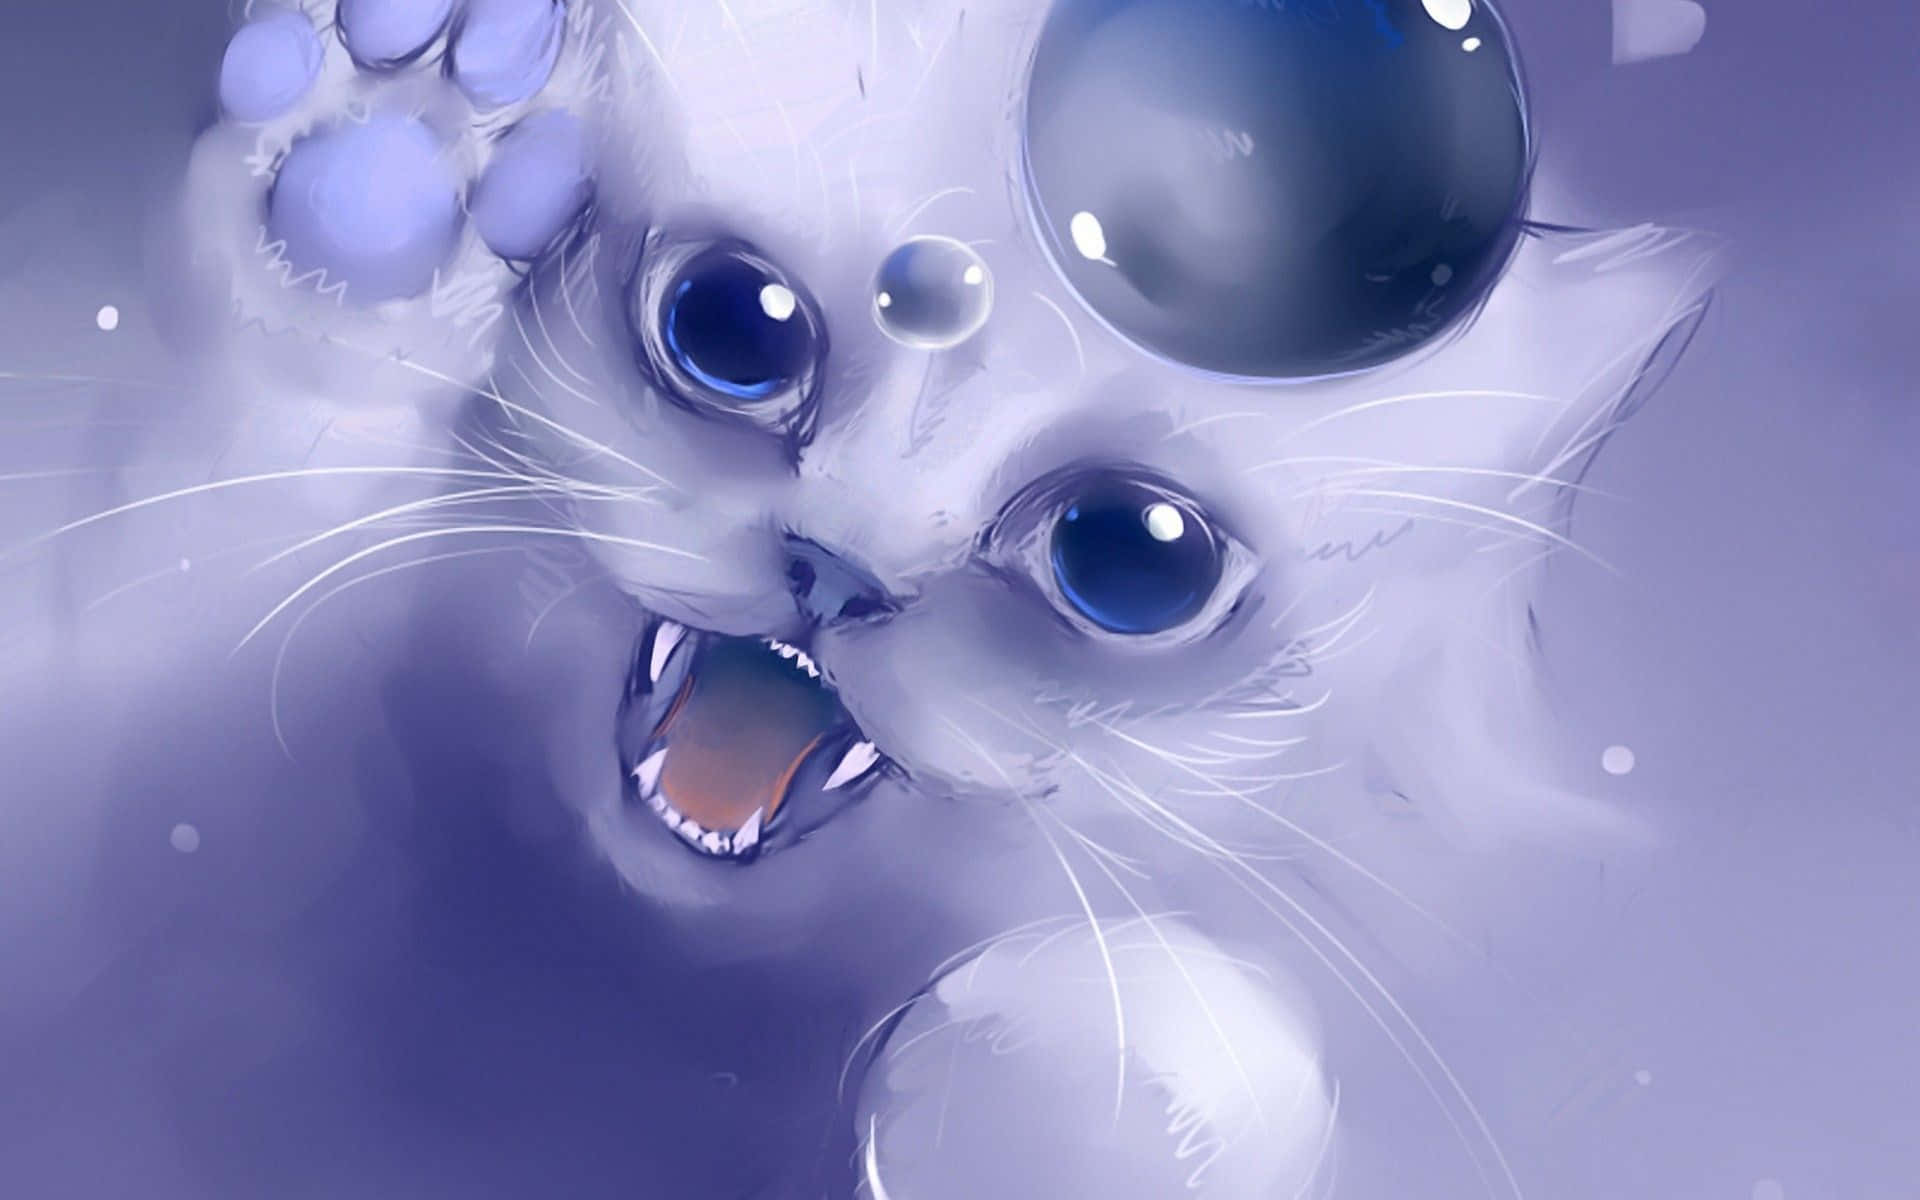 A White Cat With Blue Eyes And Blue Balls